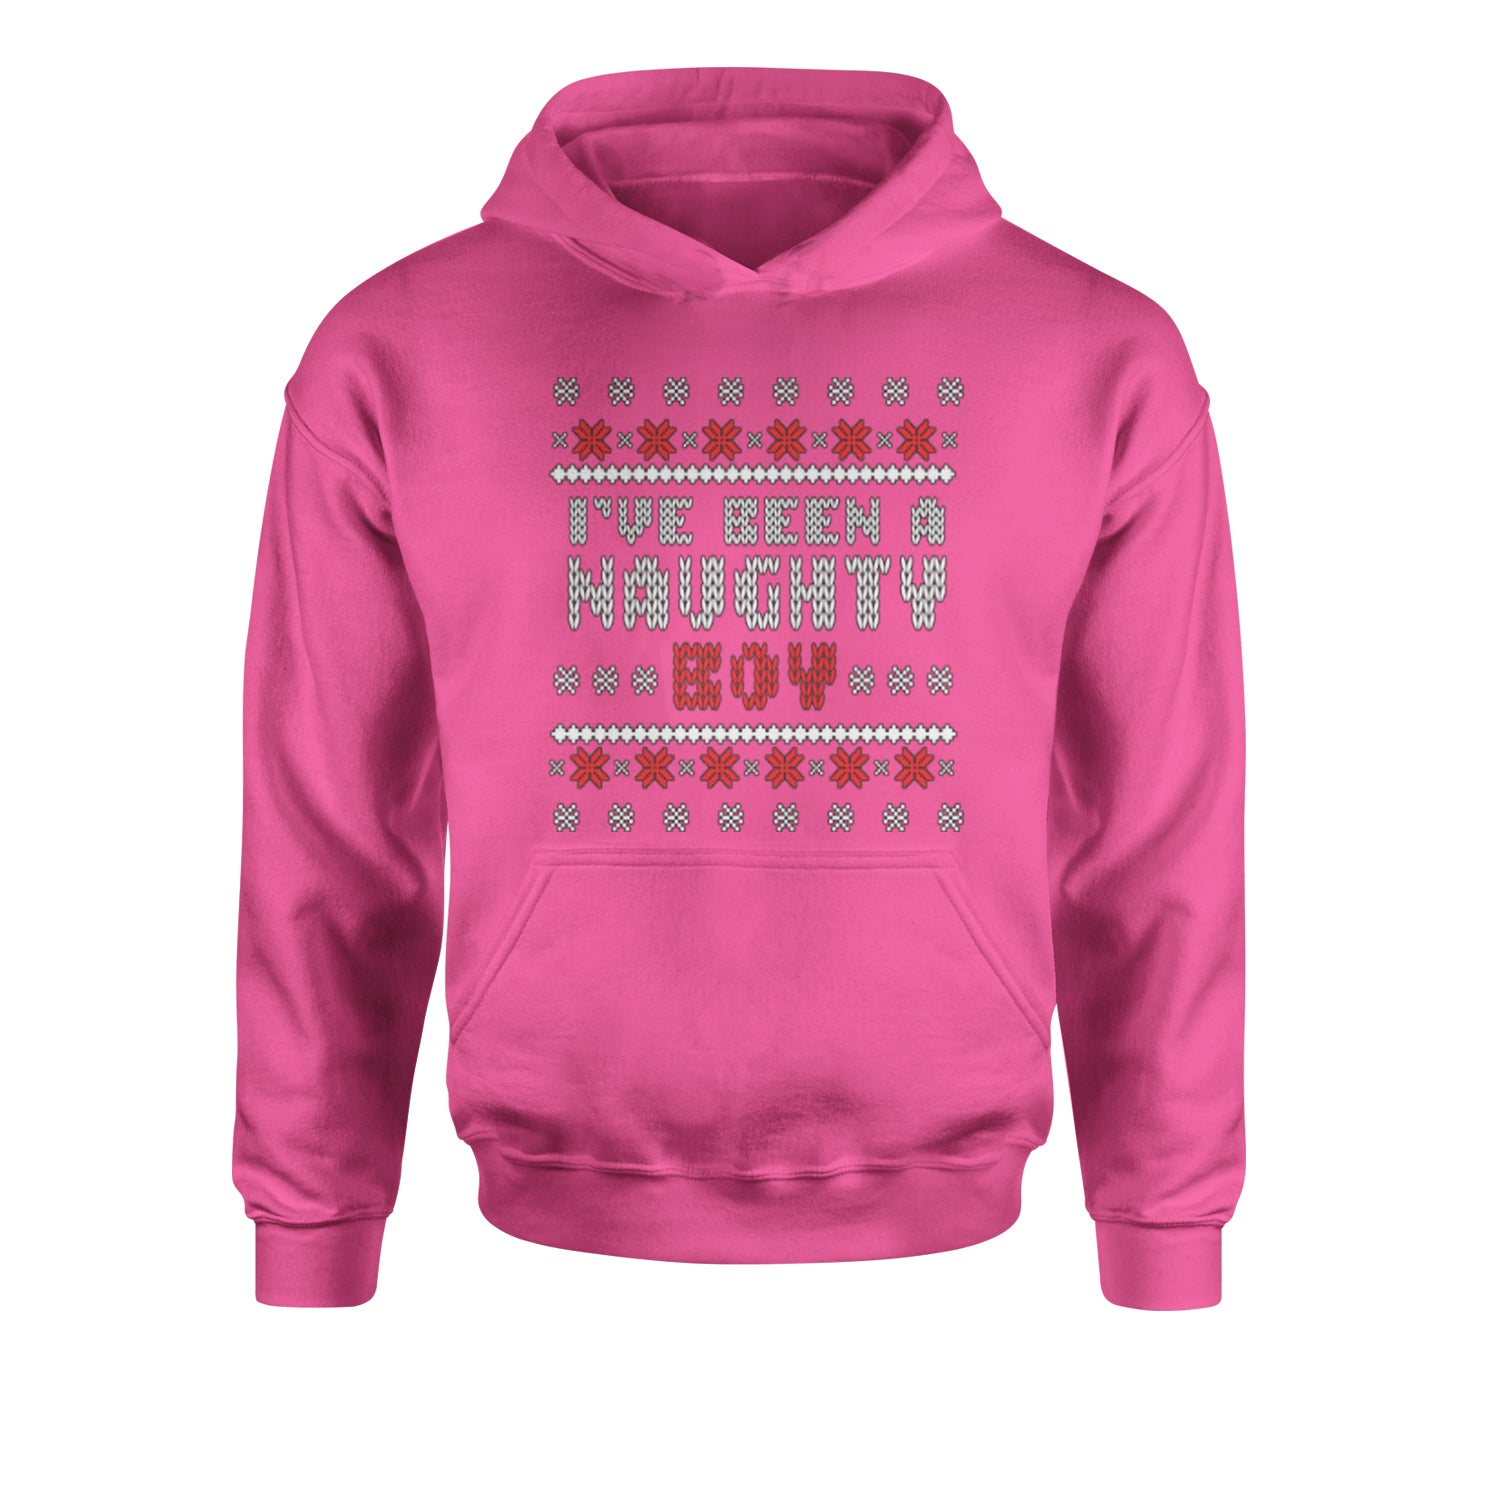 I've Been A Naughty Boy Ugly Christmas Youth-Sized Hoodie list, naughty, nice, santa, ugly, xmas by Expression Tees